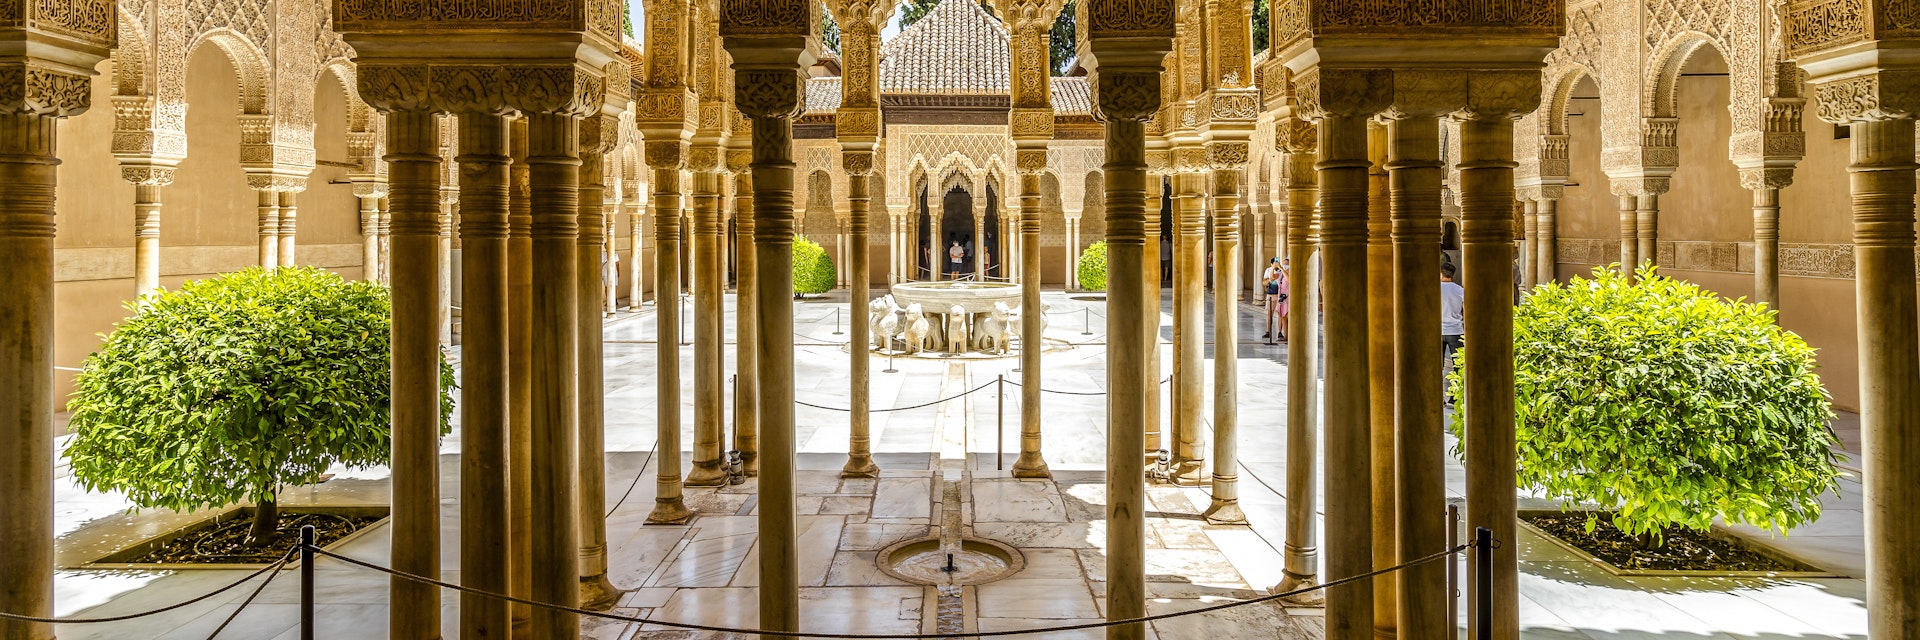 Court of the Lions is part of Nasrid Palaces of Alhambra palace complex, Granada, Spain.